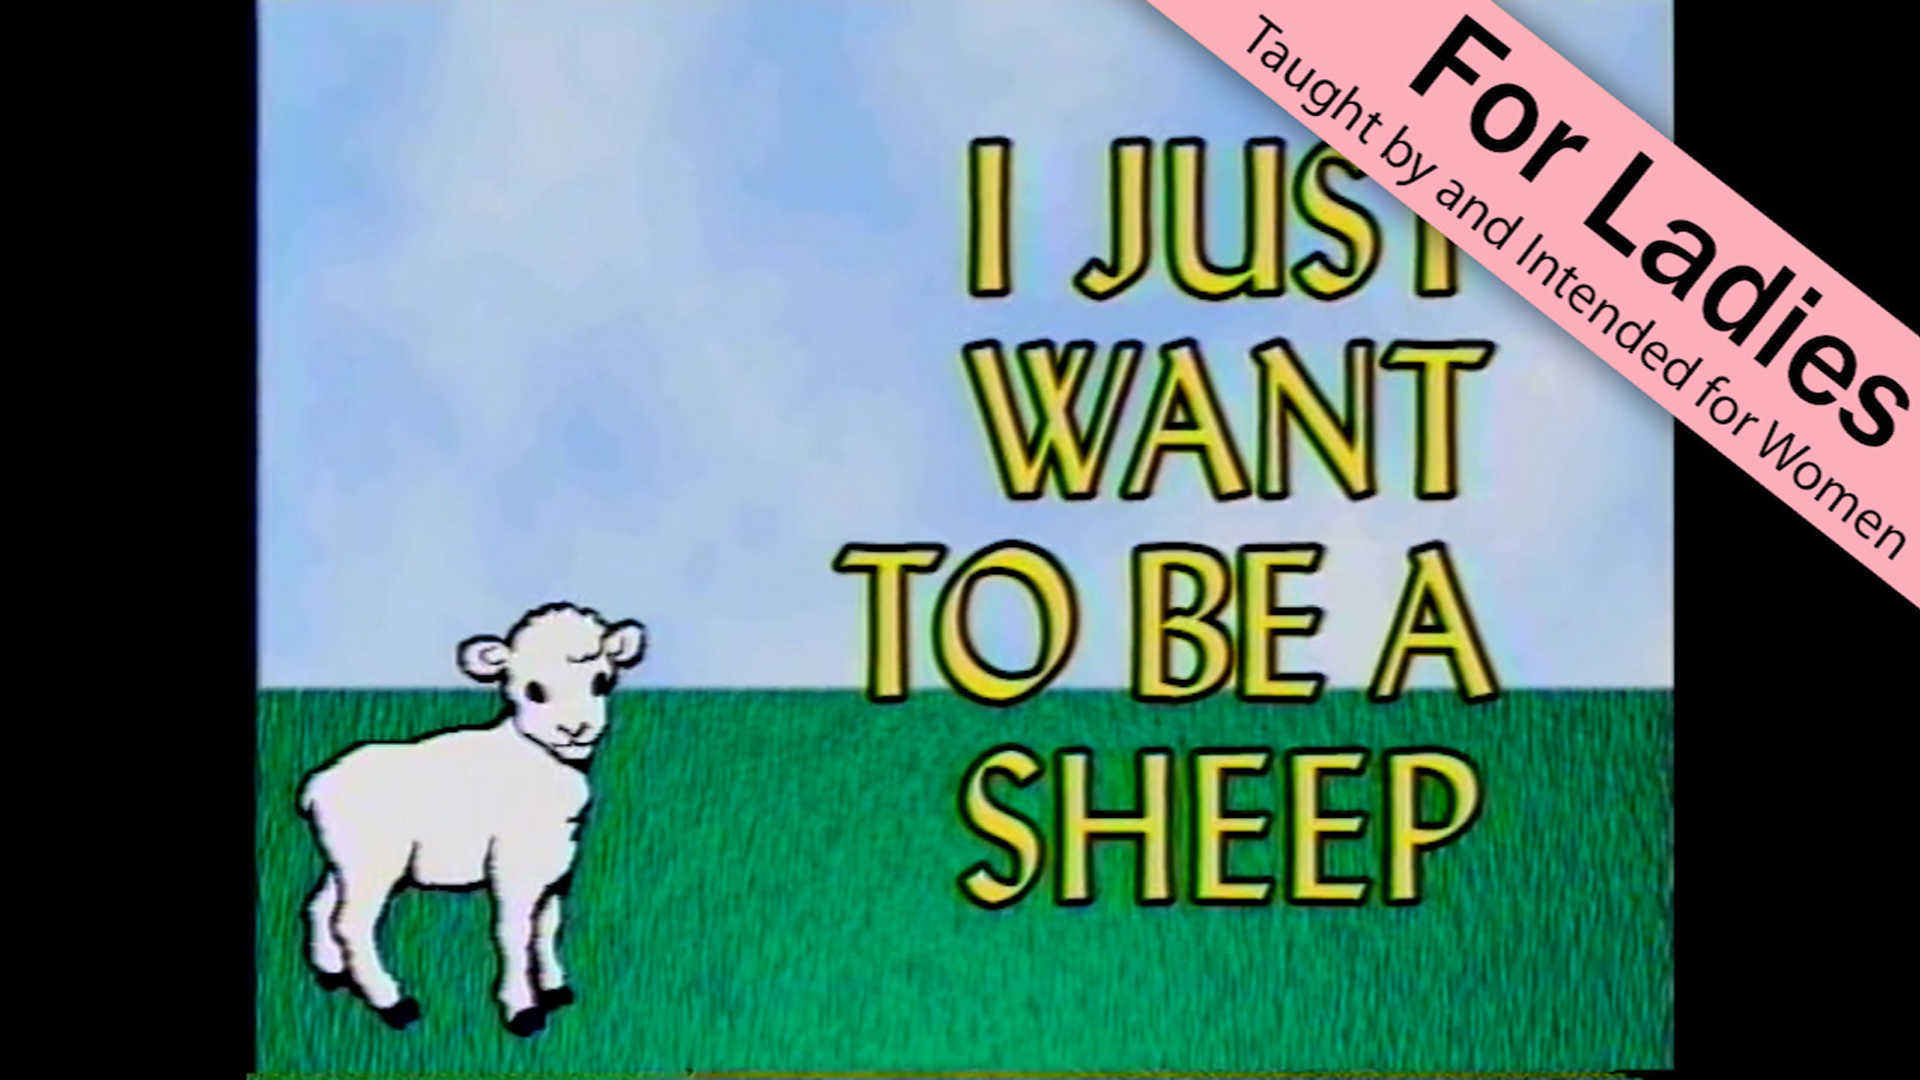 I Just Want to Be a Sheep